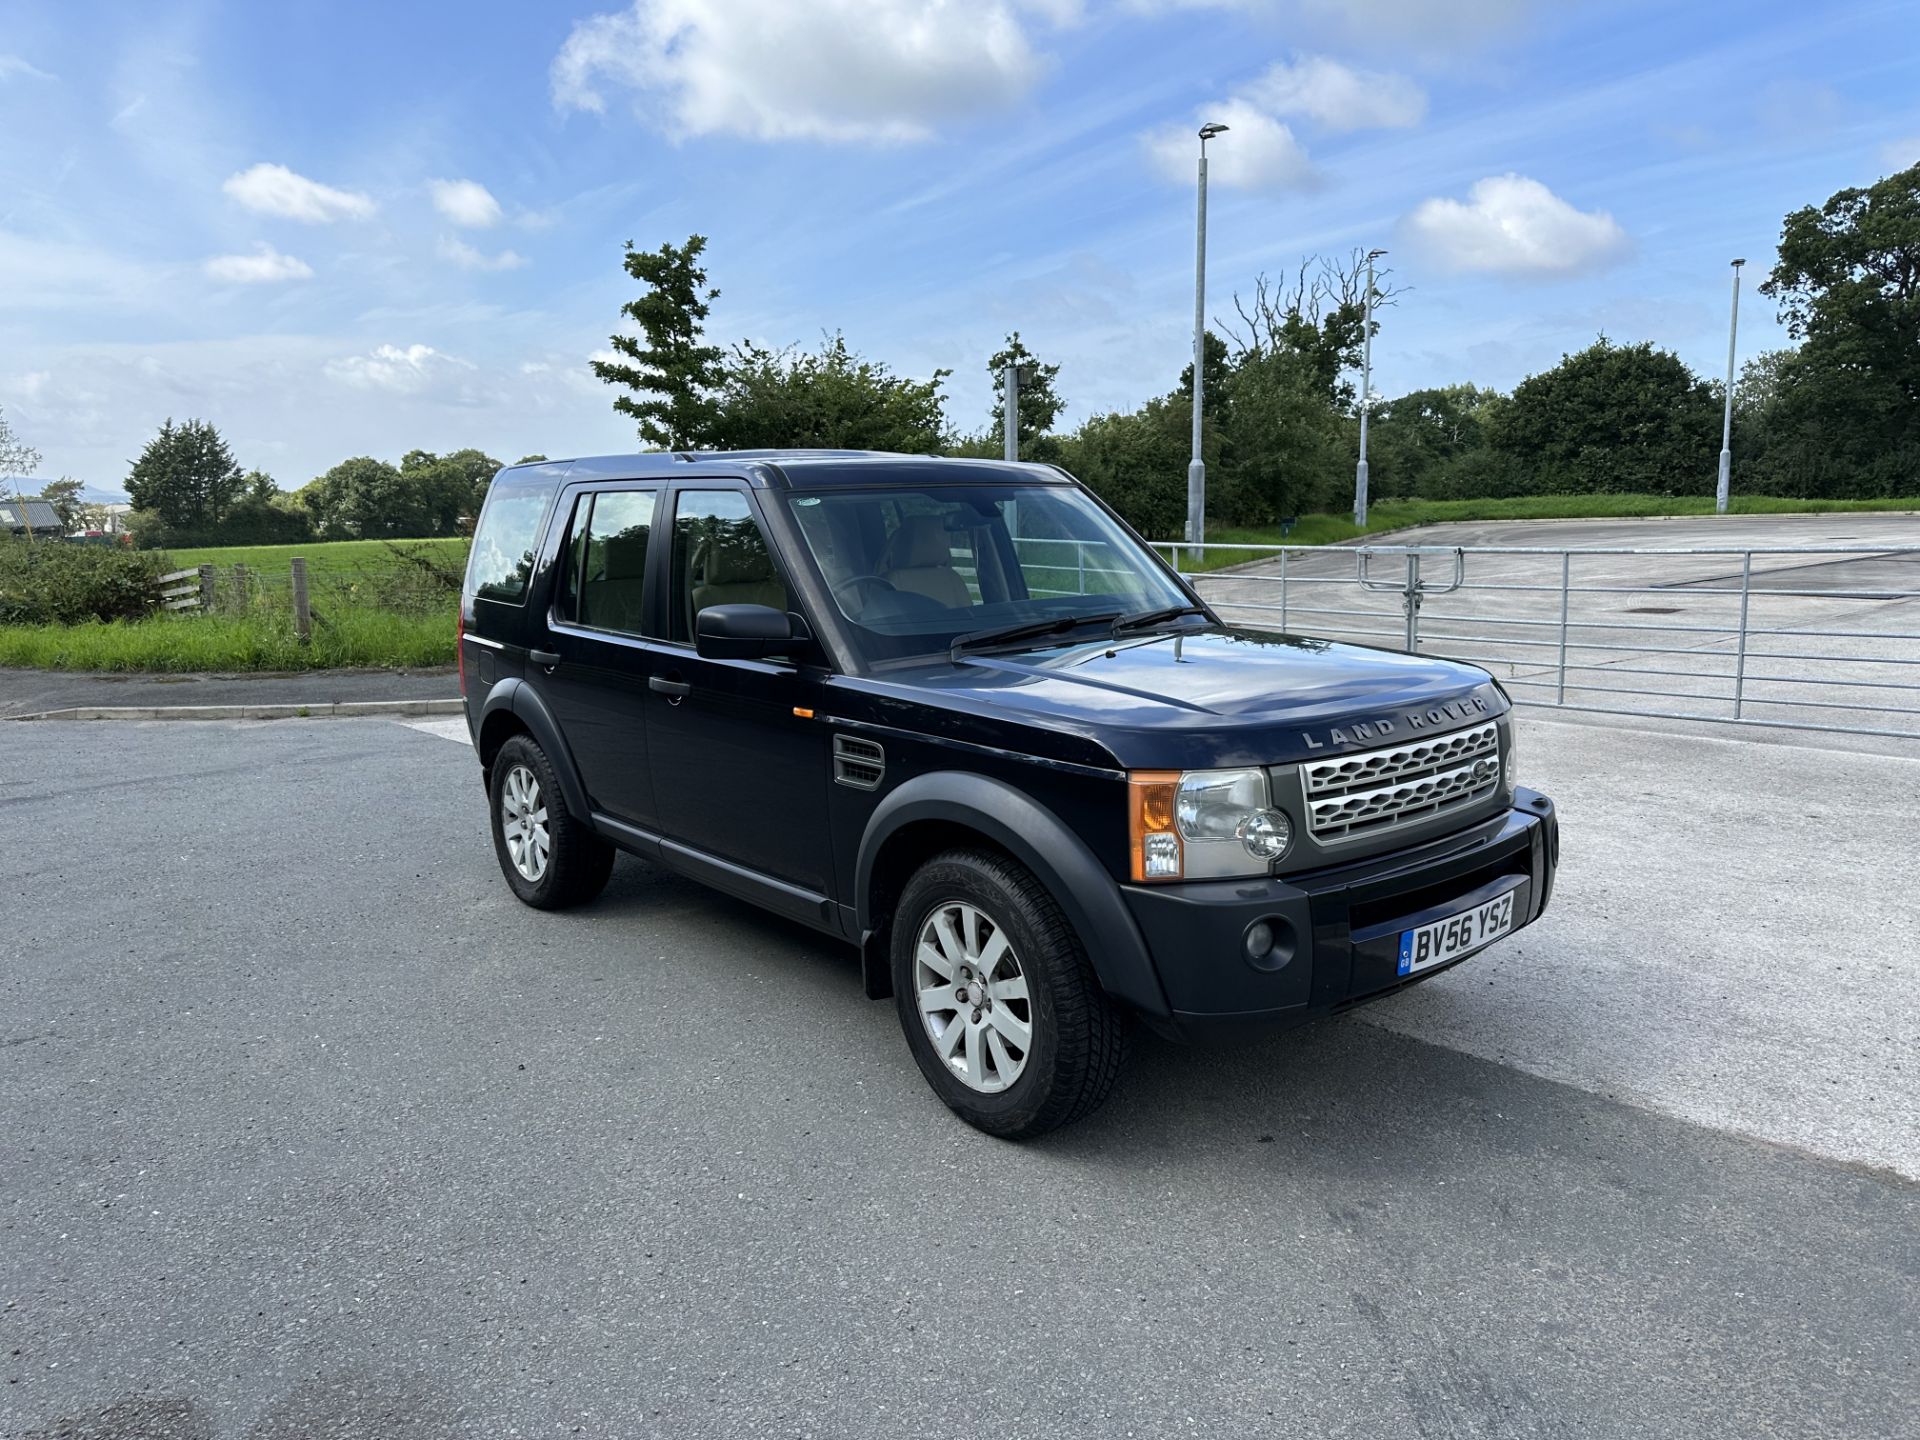 LAND ROVER DISCOVERY 3 - 2006- 2.7 LITRE